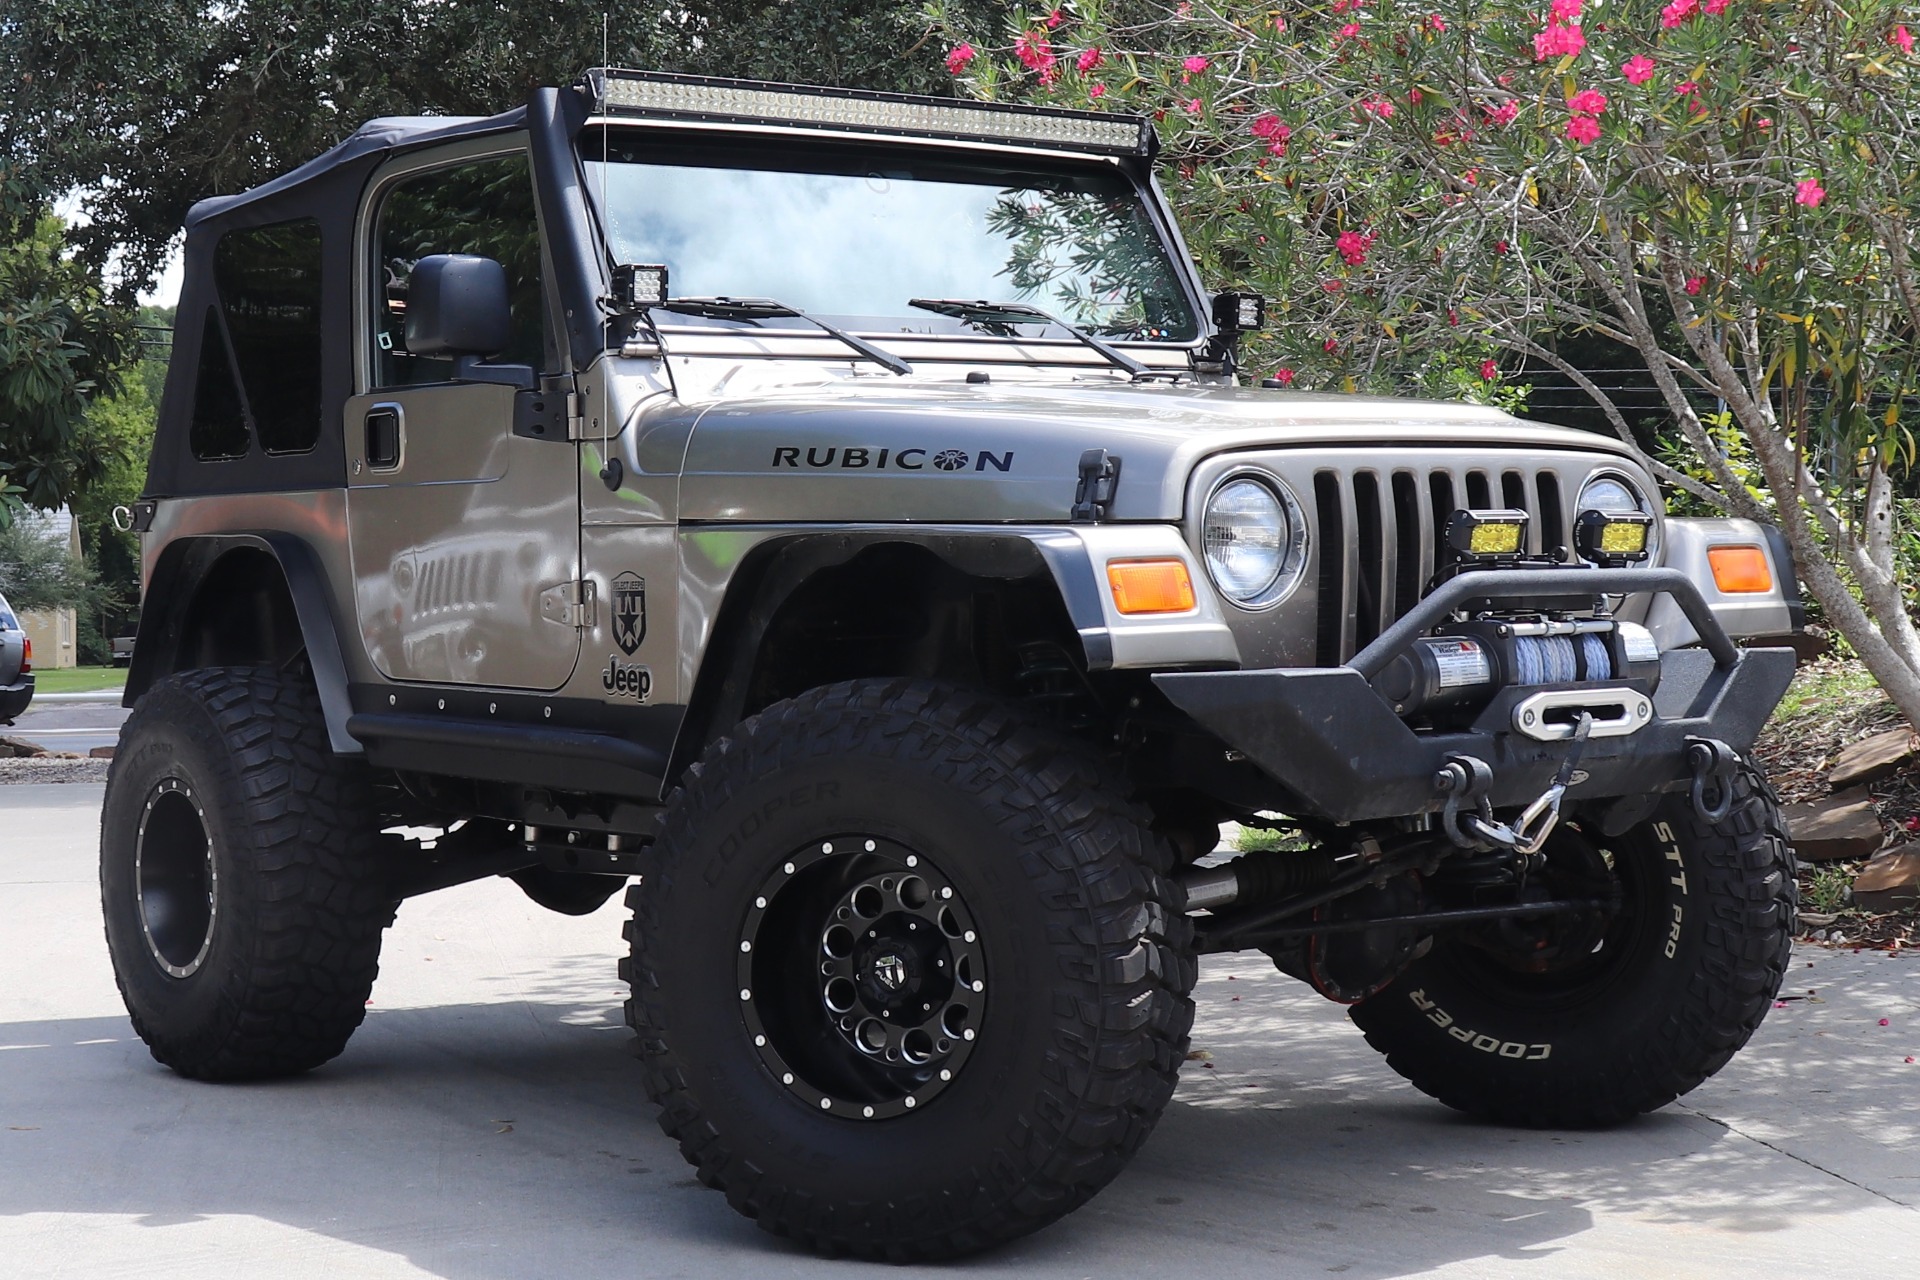 Used 2004 Jeep Wrangler Rubicon For Sale ($21,995) | Select Jeeps Inc